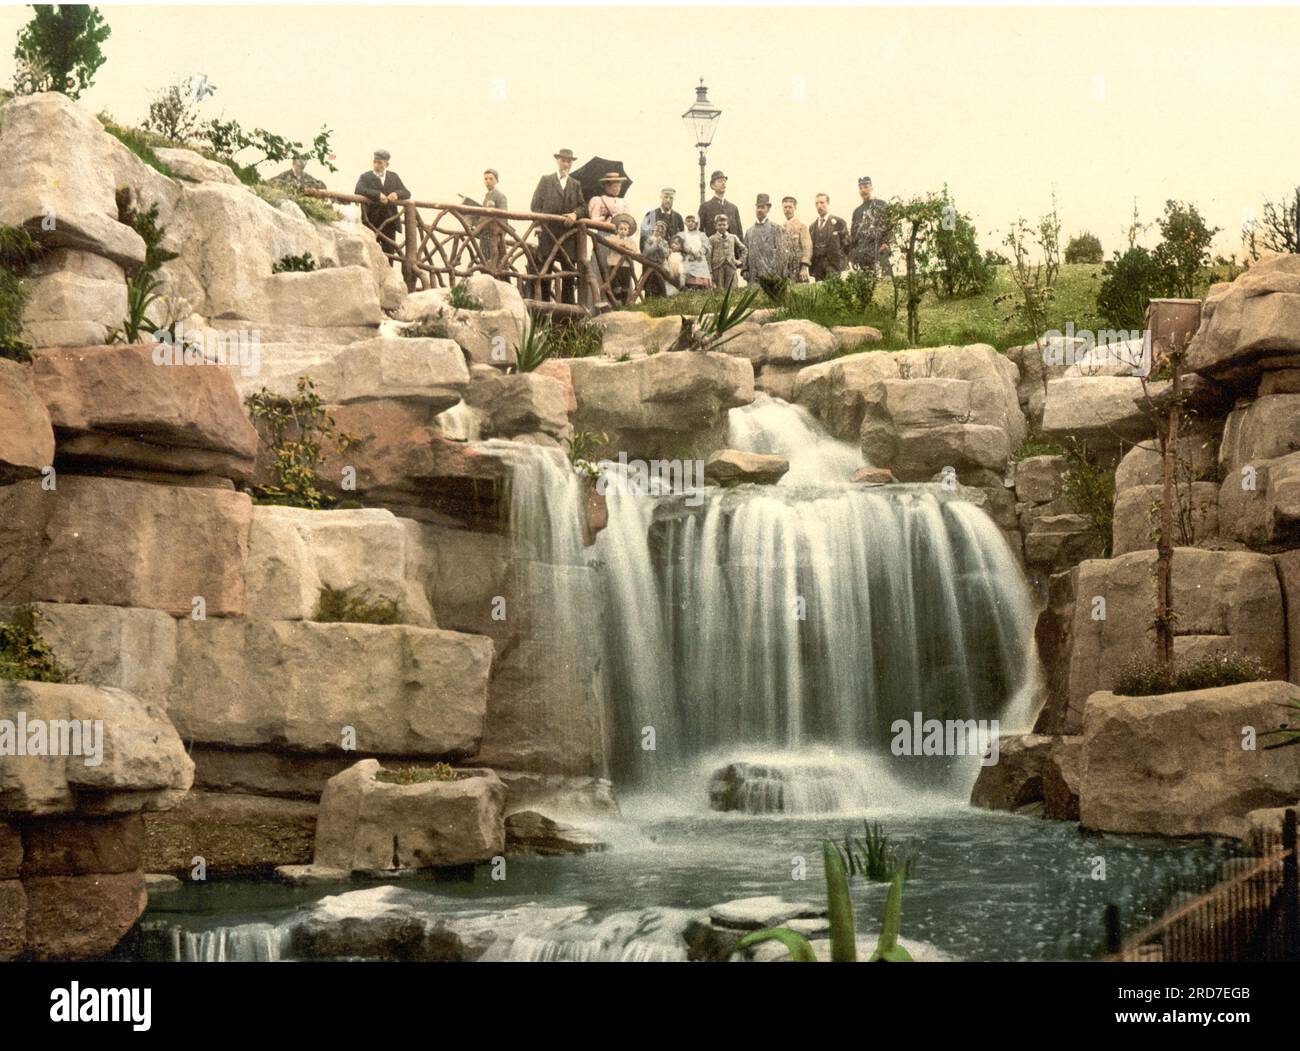 The waterfall, Ramsgate, a seaside town in the district of Thanet in east Kent, England, 1895, Historical, digital improved reproduction of an old Photochrome print Stock Photo